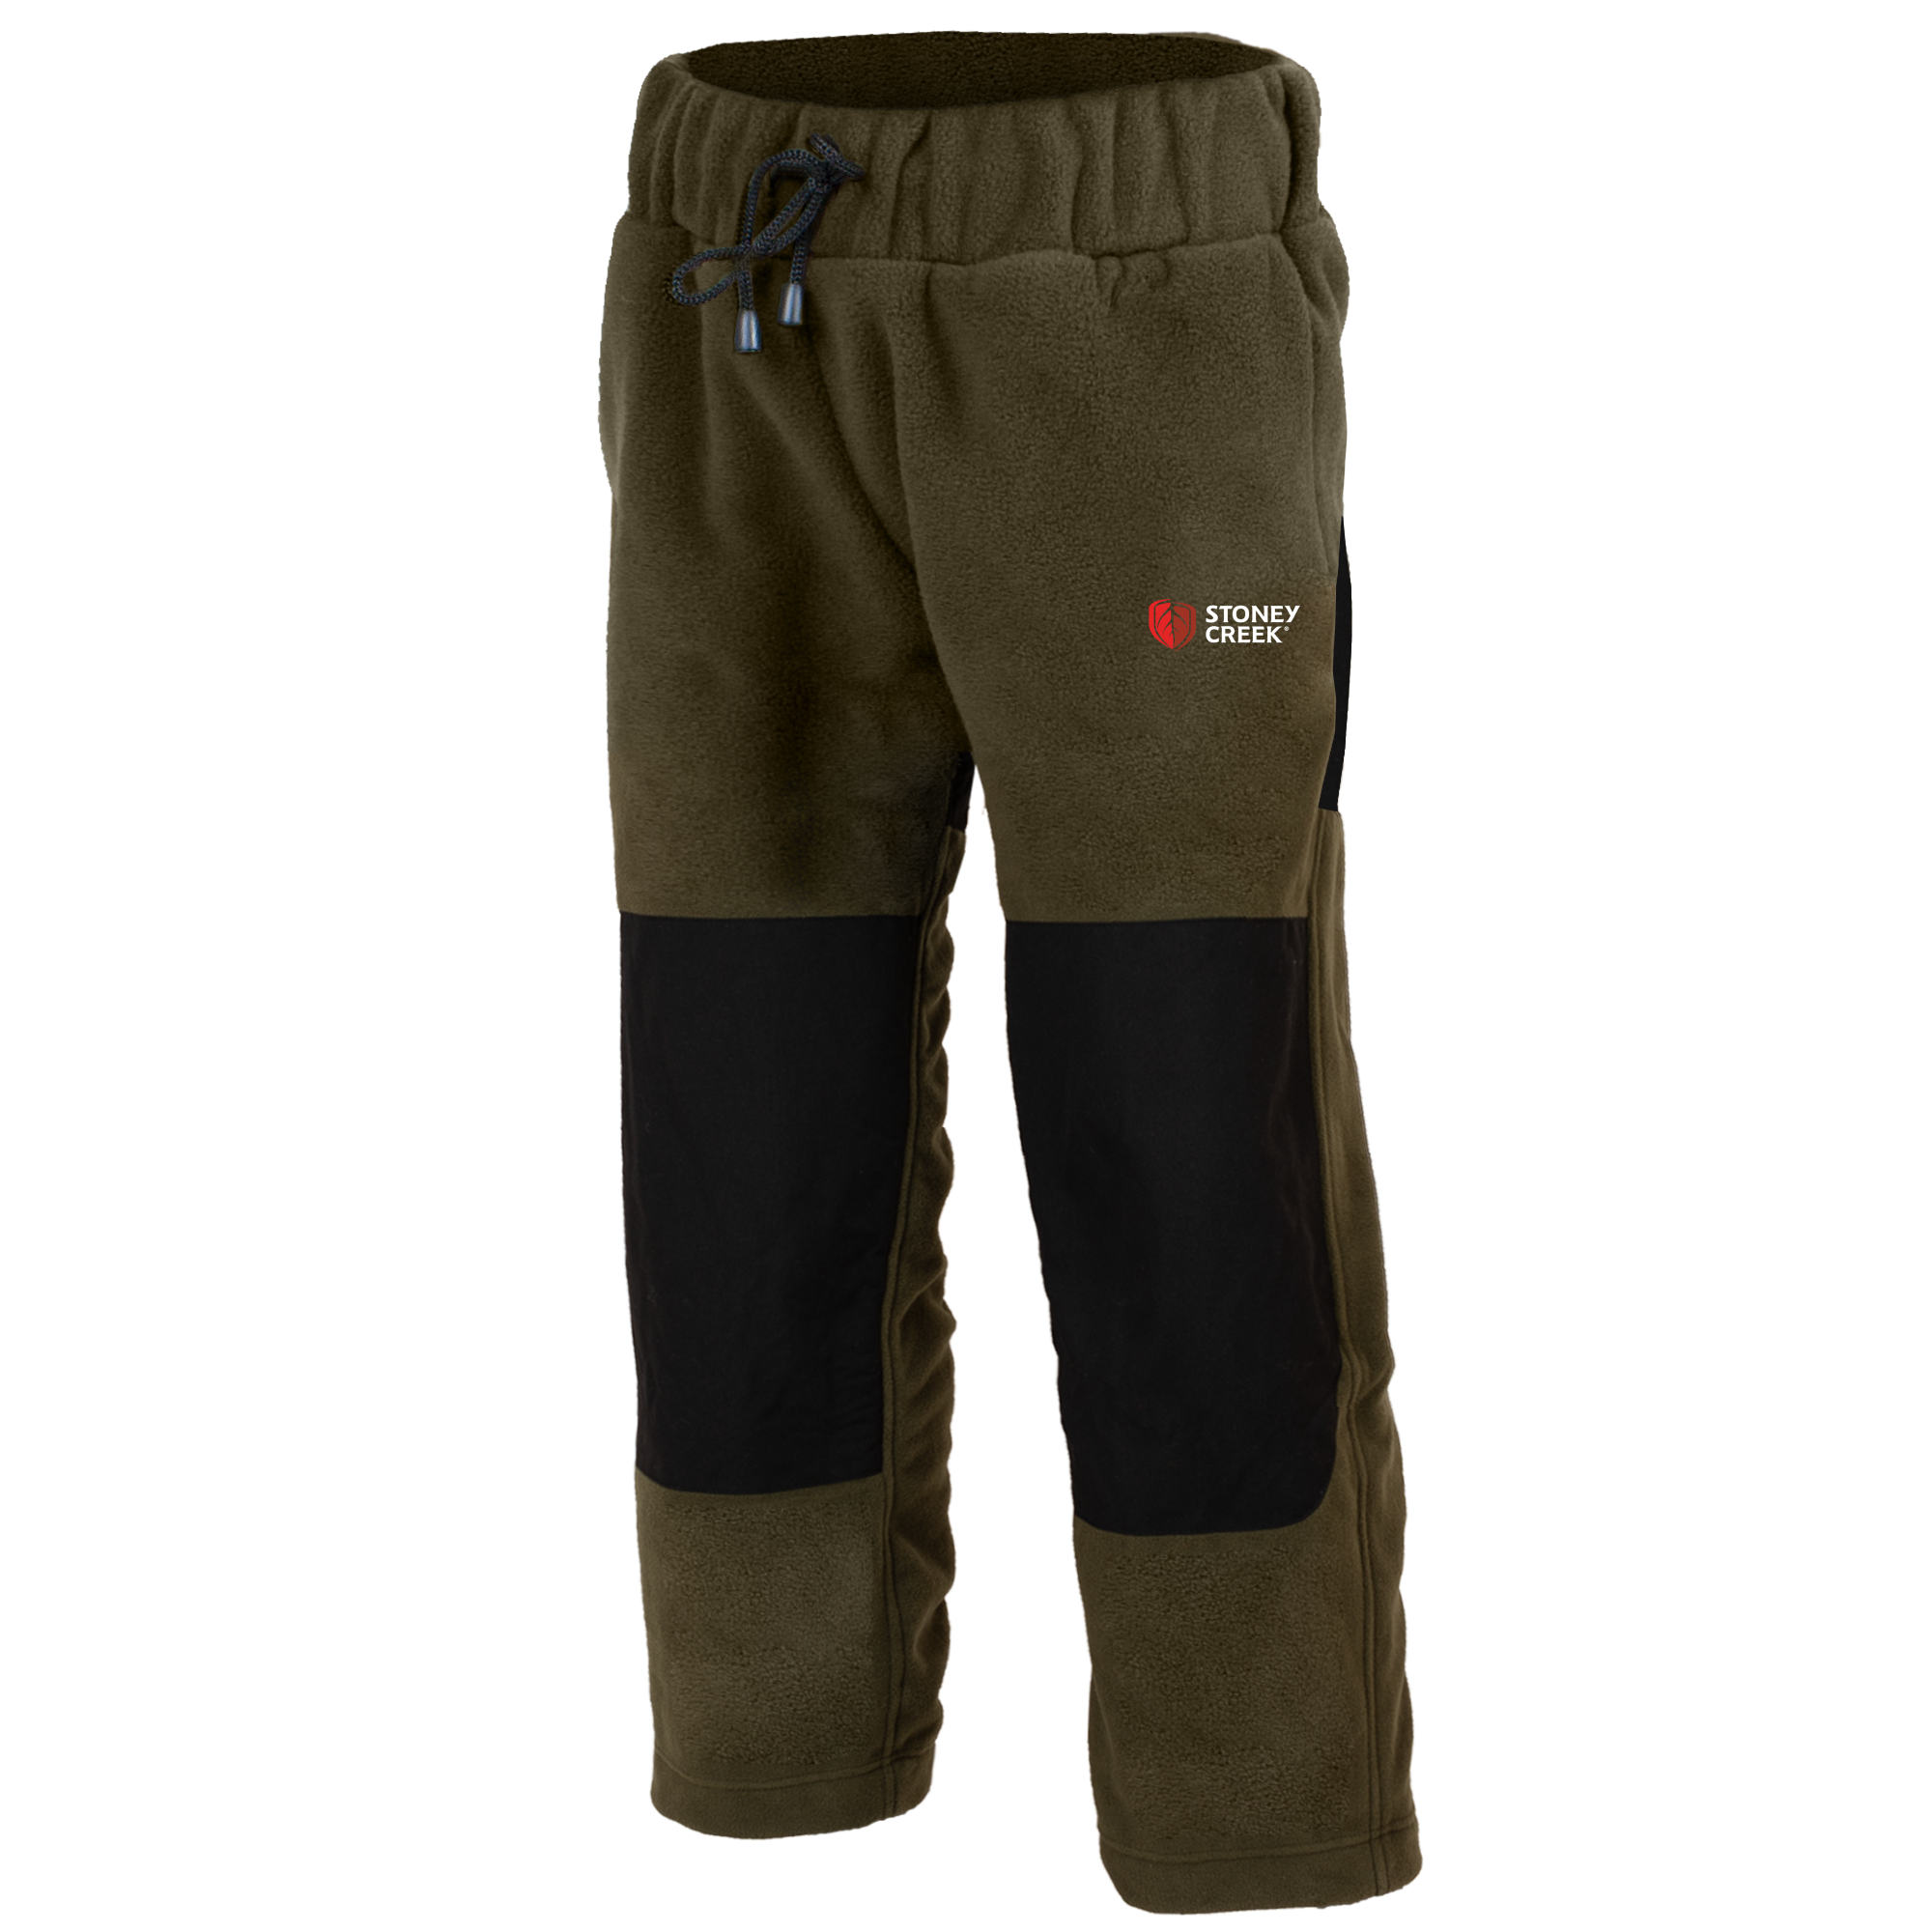 Stoney Creek Kids Farm Trackpants - 2 / BAYLEAF - Mansfield Hunting & Fishing - Products to prepare for Corona Virus